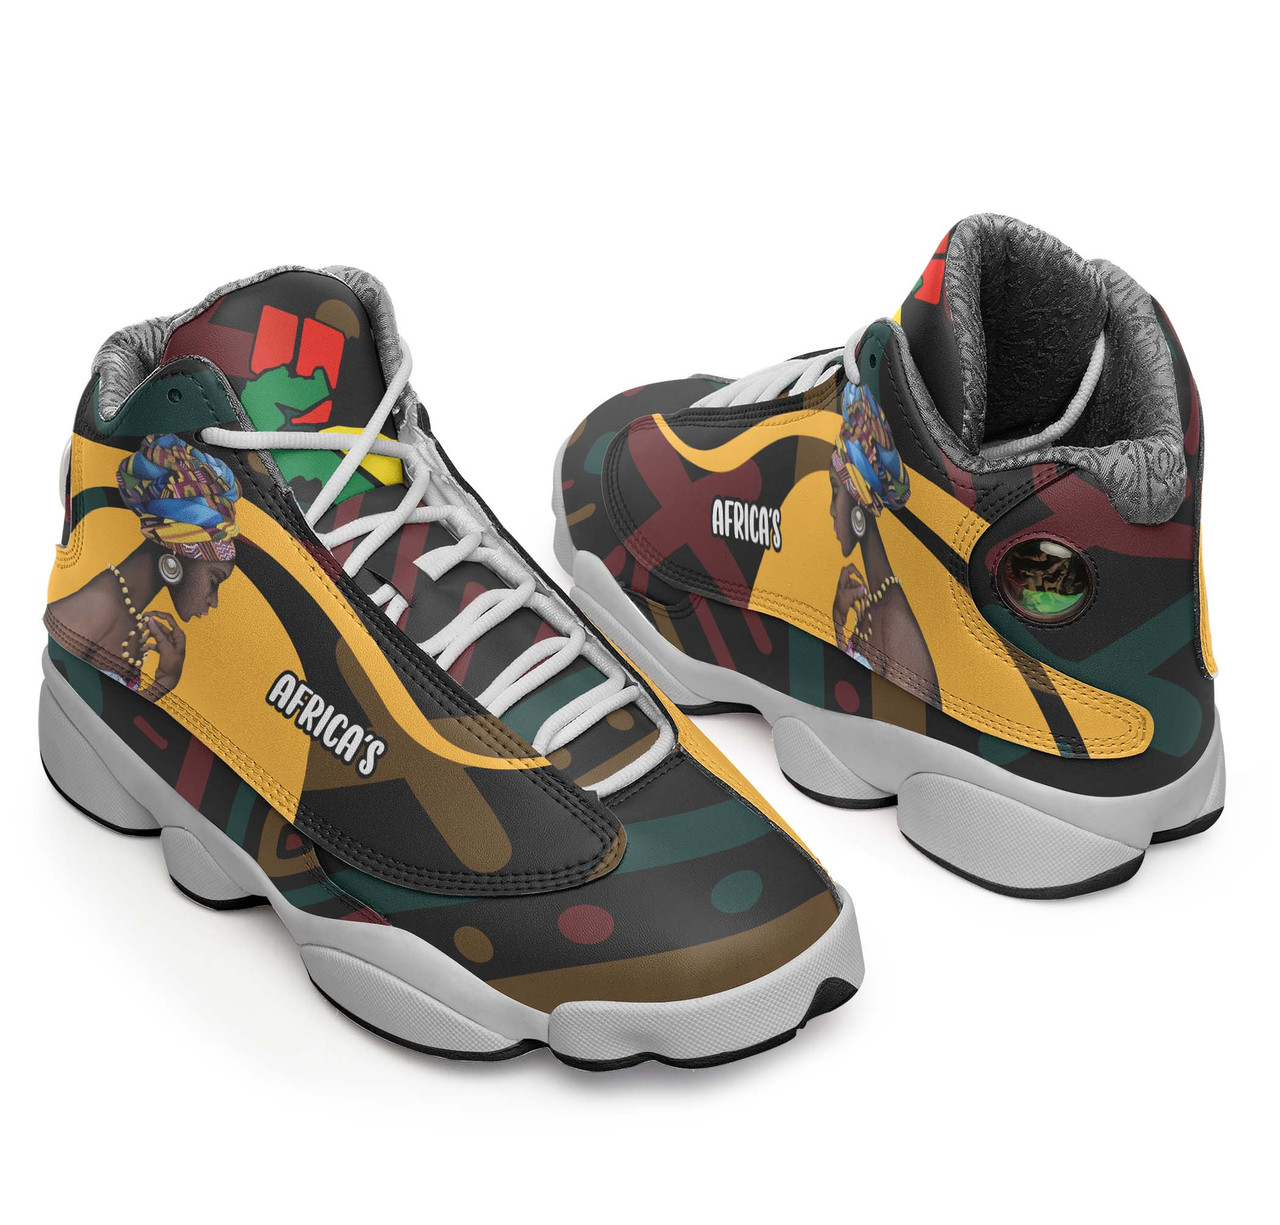 African High Top Basketball Shoes J 13 - Celebrate Africa's Woman's Day with Ethnic Patterns High Top Sneakers J 13